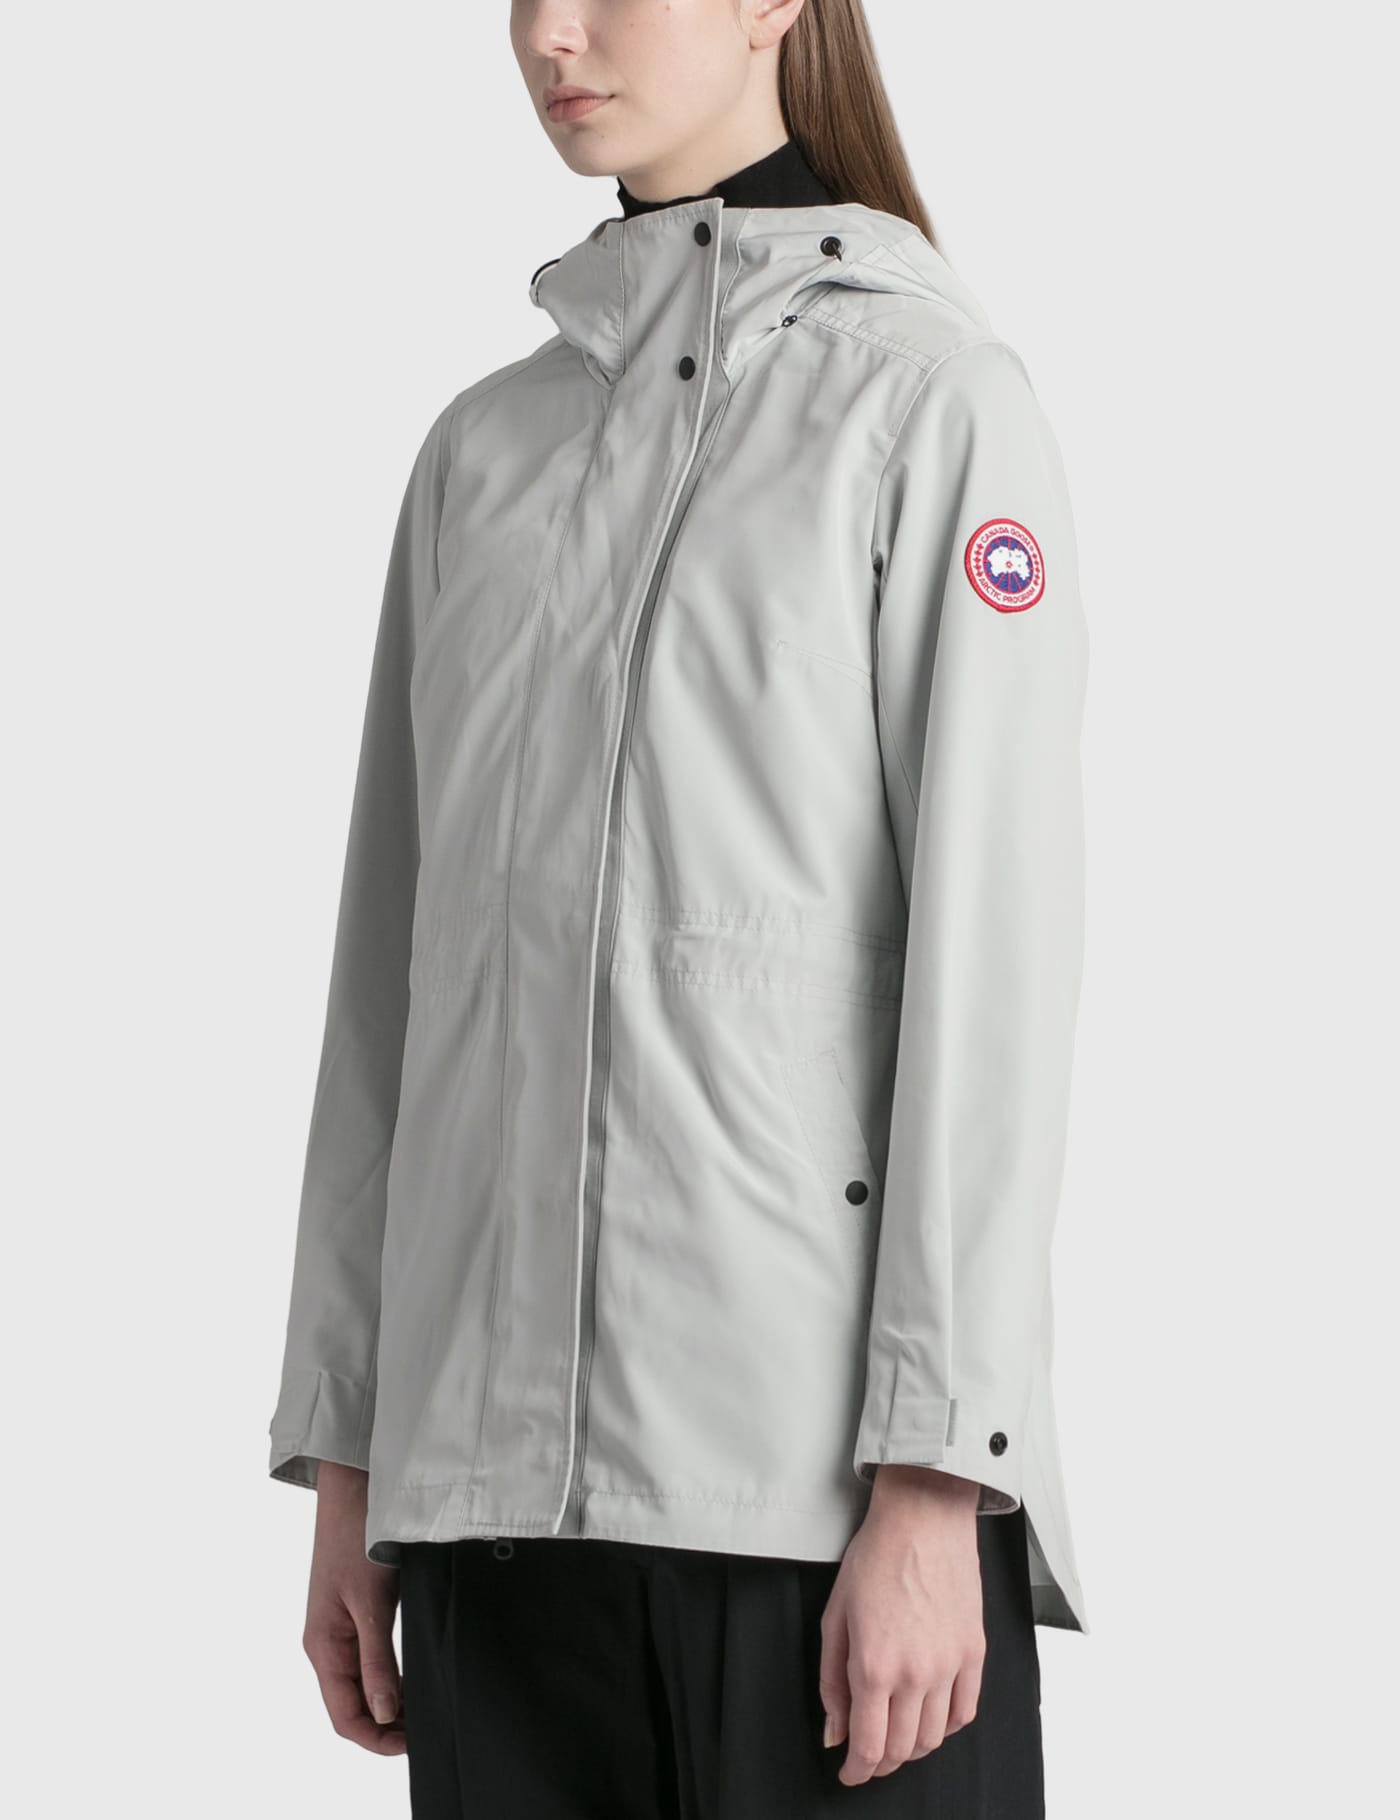 Canada Goose - Minden Jacket | HBX - Globally Curated Fashion and Lifestyle  by Hypebeast